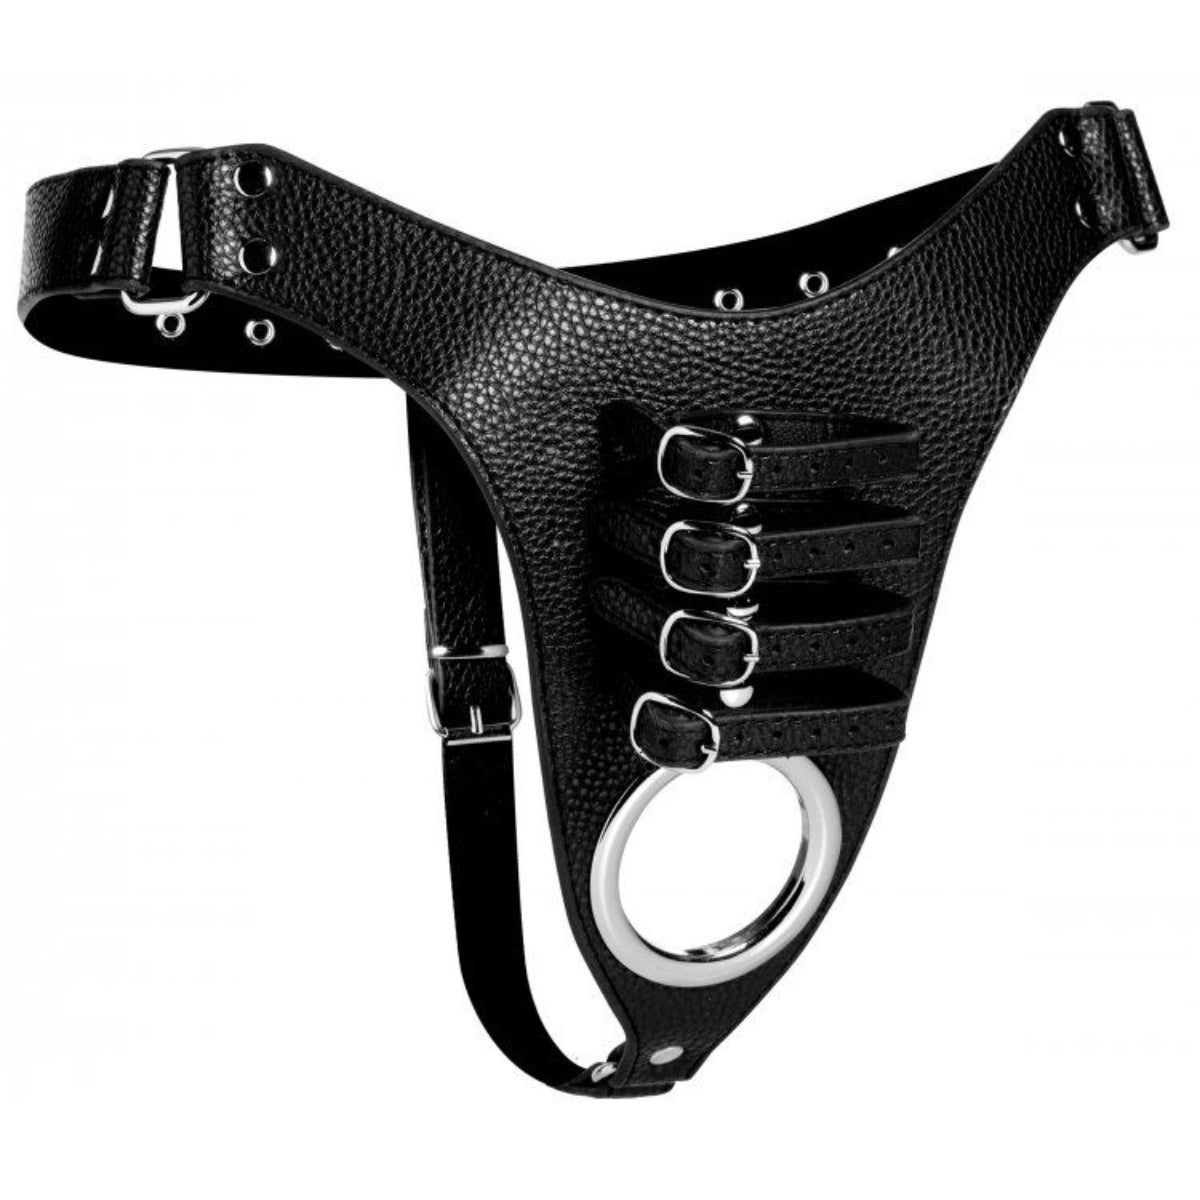 Strict Male Chastity Harness Black